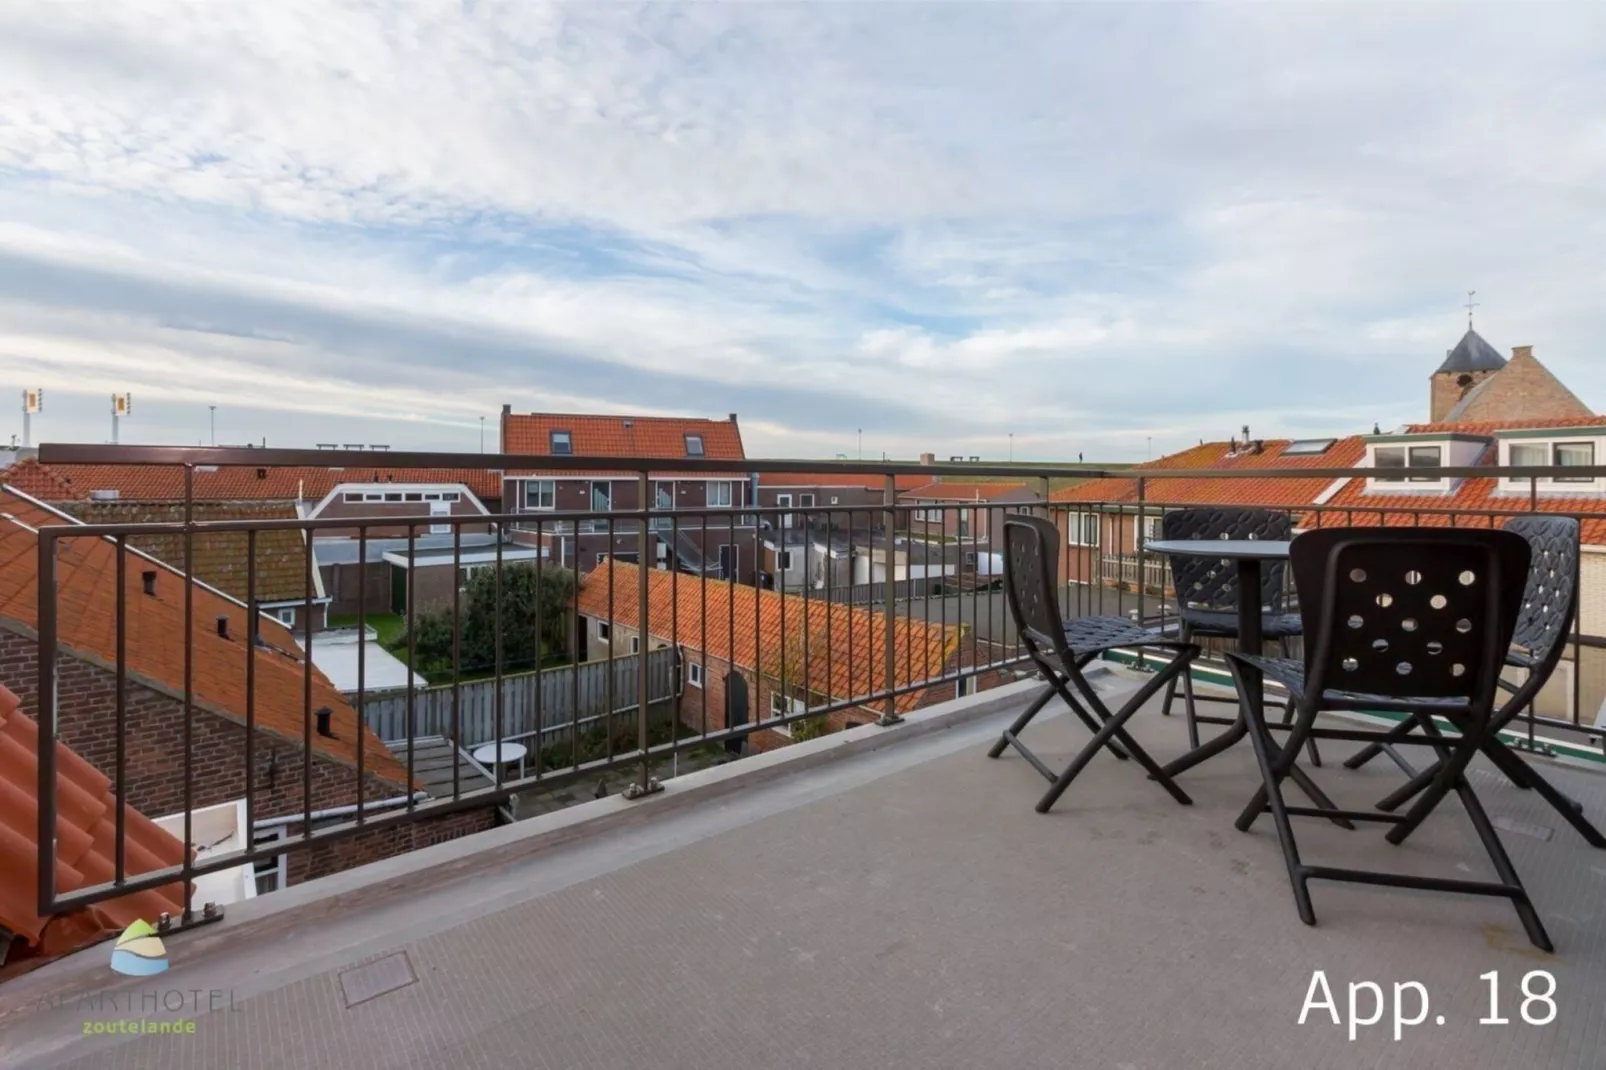 Aparthotel Zoutelande - 6 pers luxe appartement huisdier